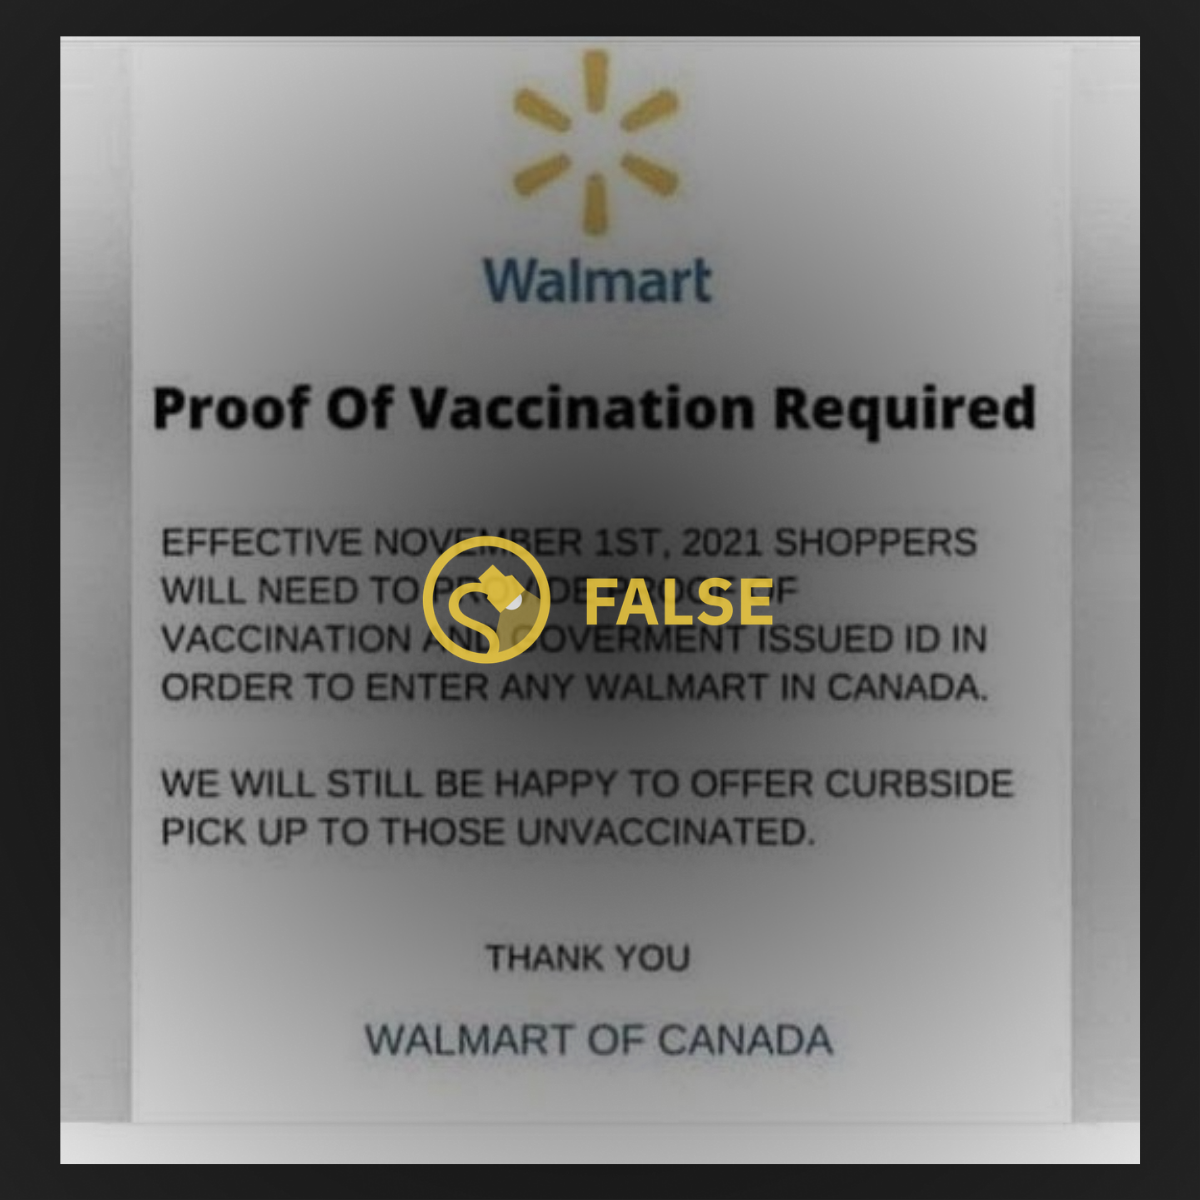 Walmart Canada - Proof of Vaccination Required (Meme)